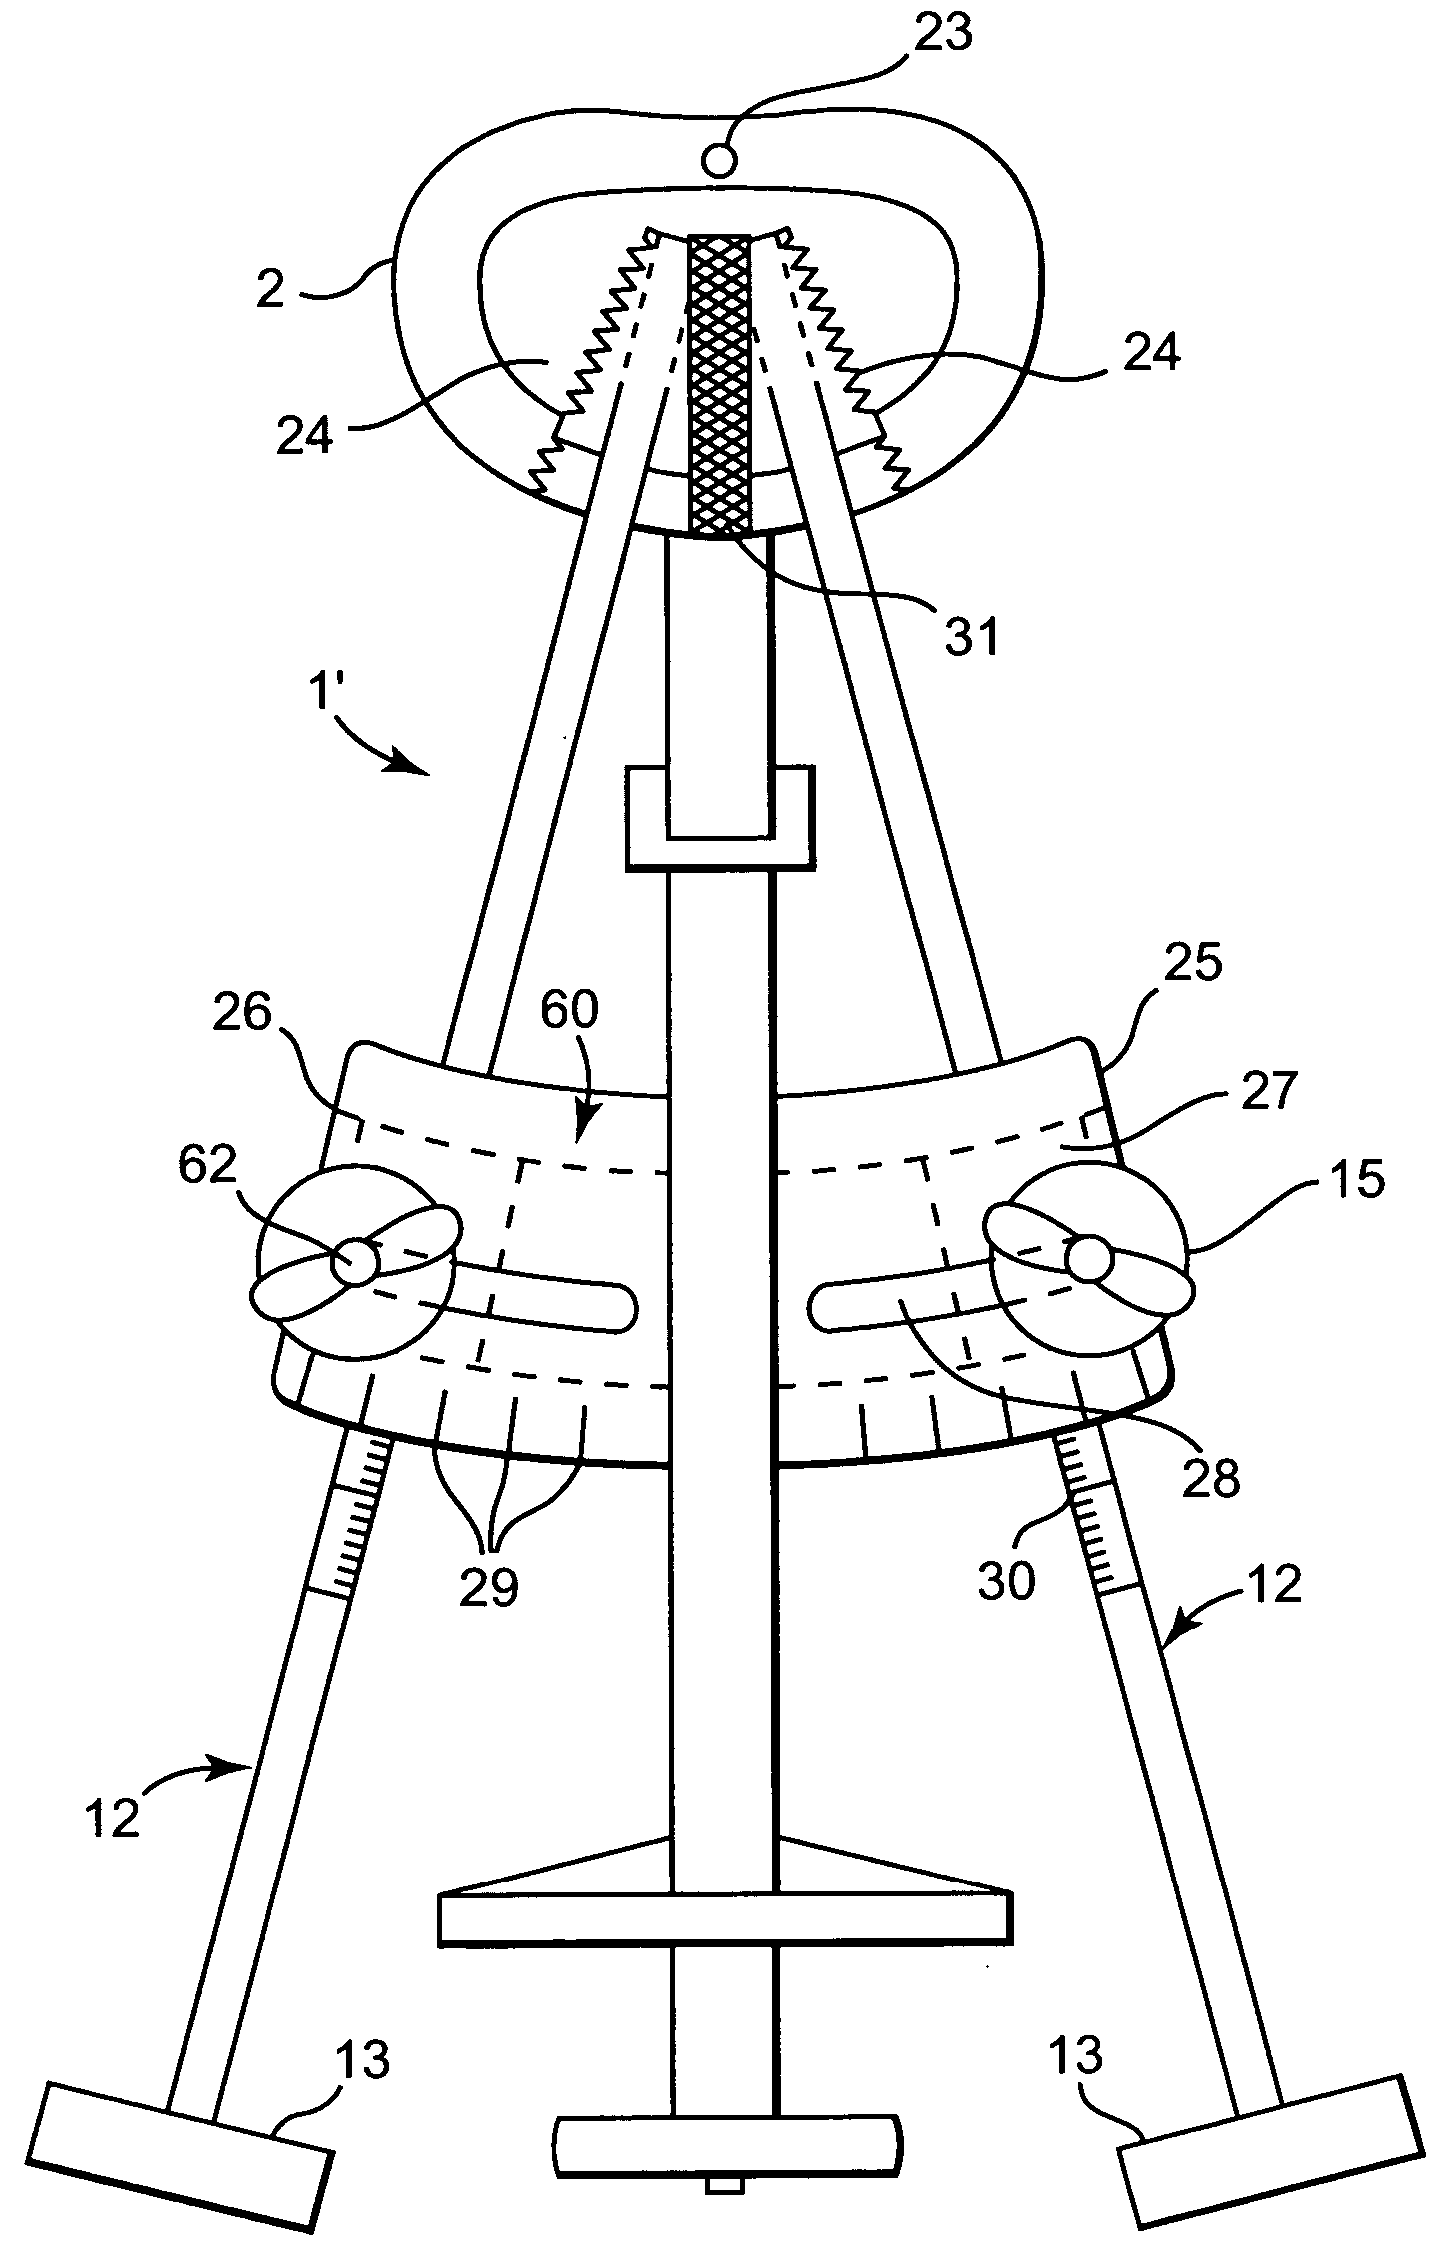 Tapered bone fusion cages or blocks, implantation means and method